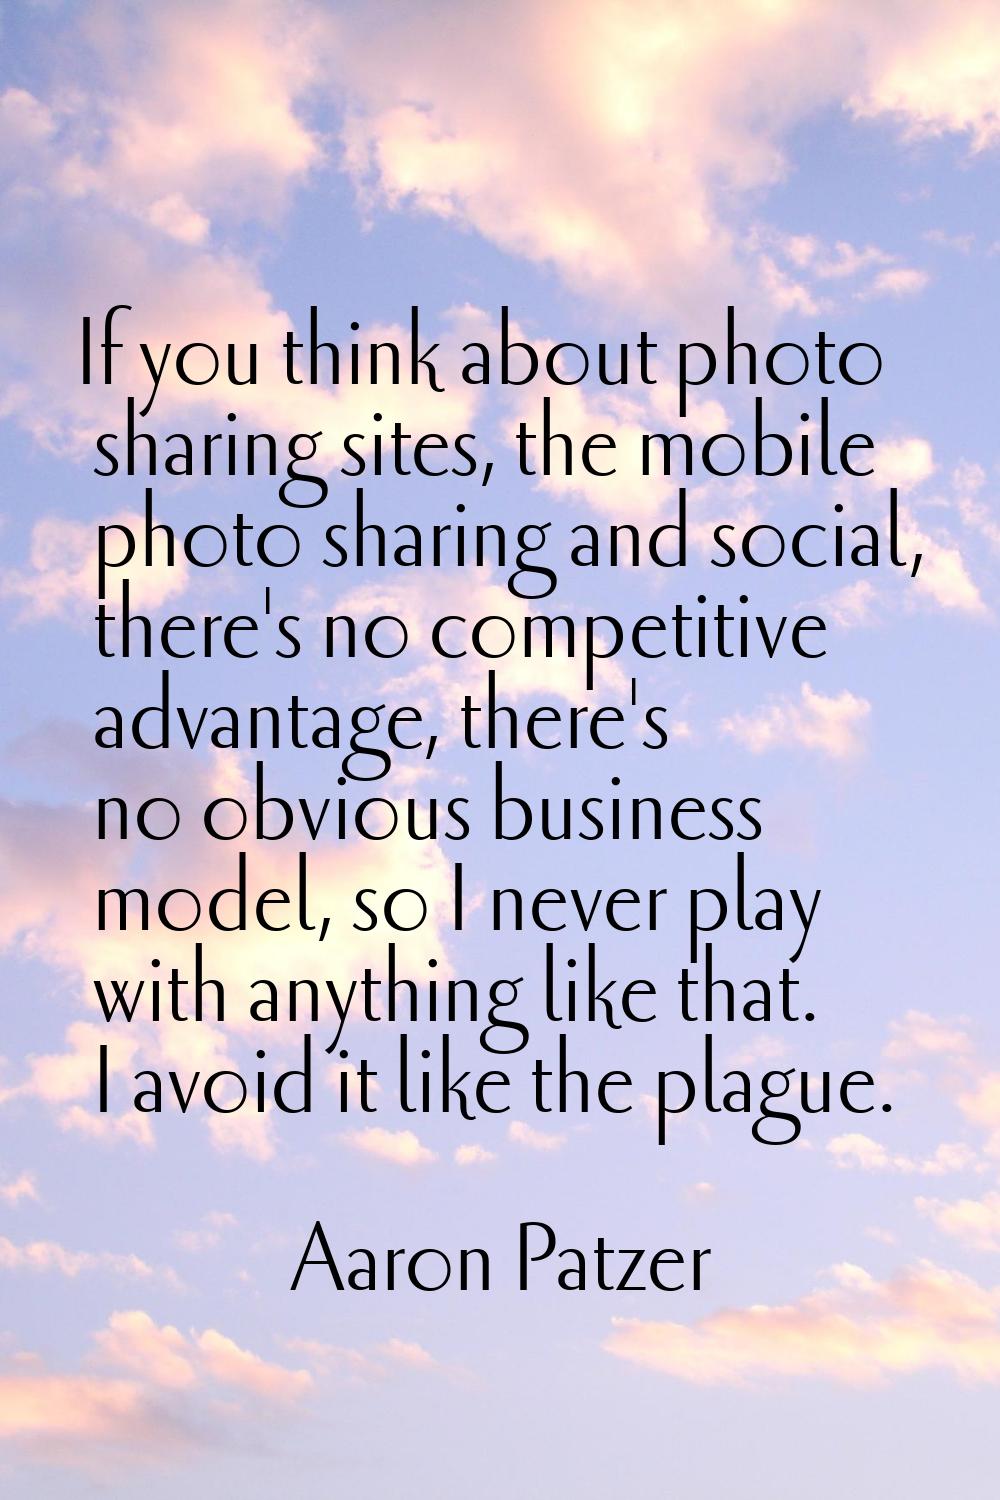 If you think about photo sharing sites, the mobile photo sharing and social, there's no competitive